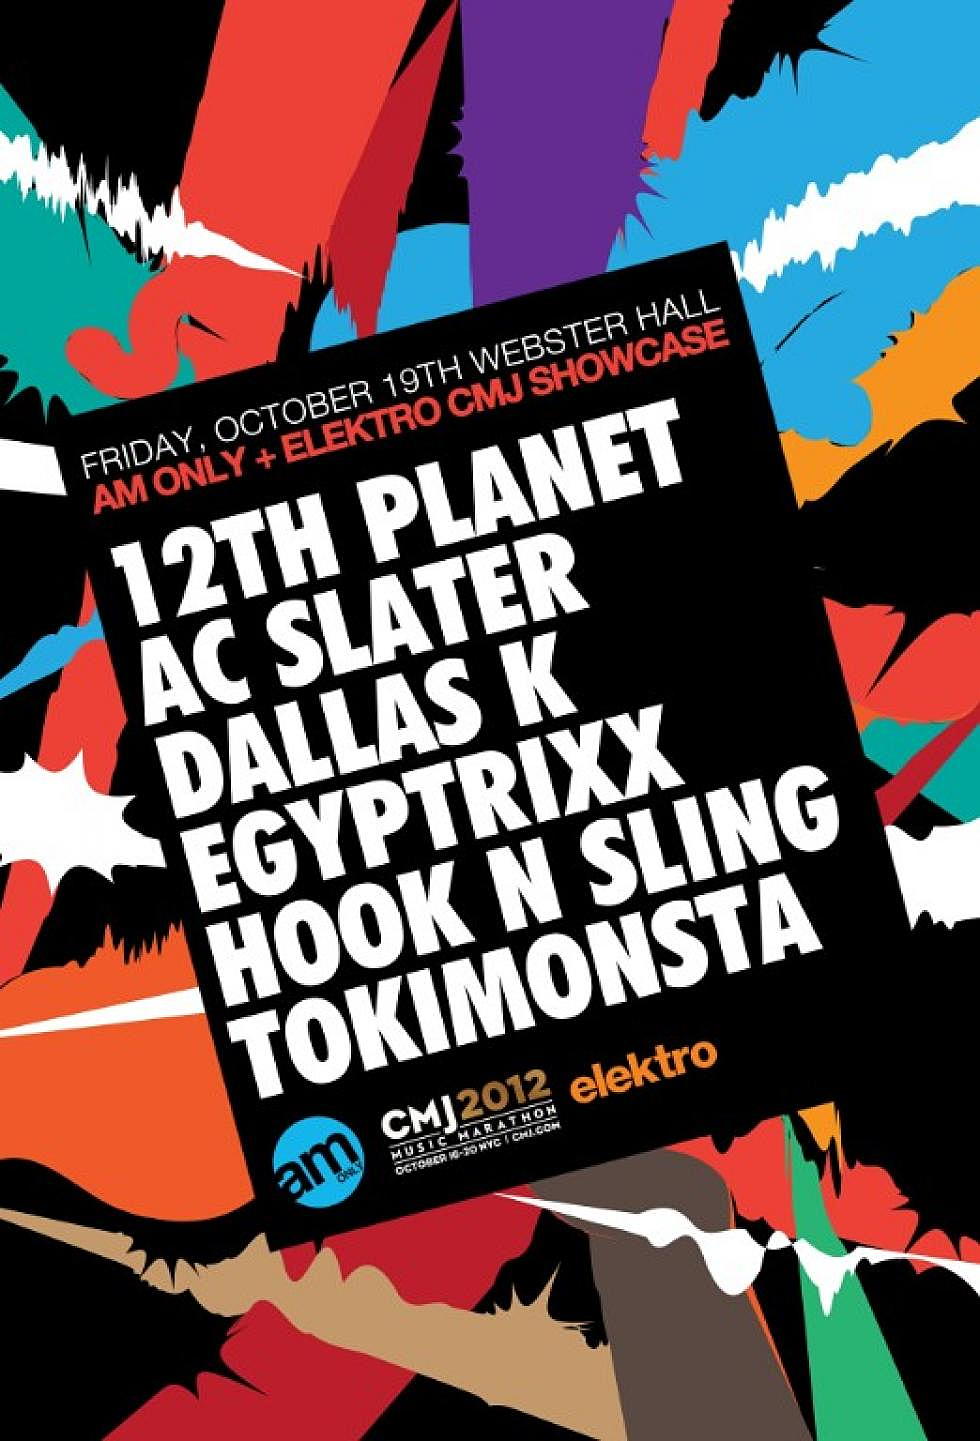 AM Only x Elektro CMJ Showcase Friday October 19th at Webster Hall